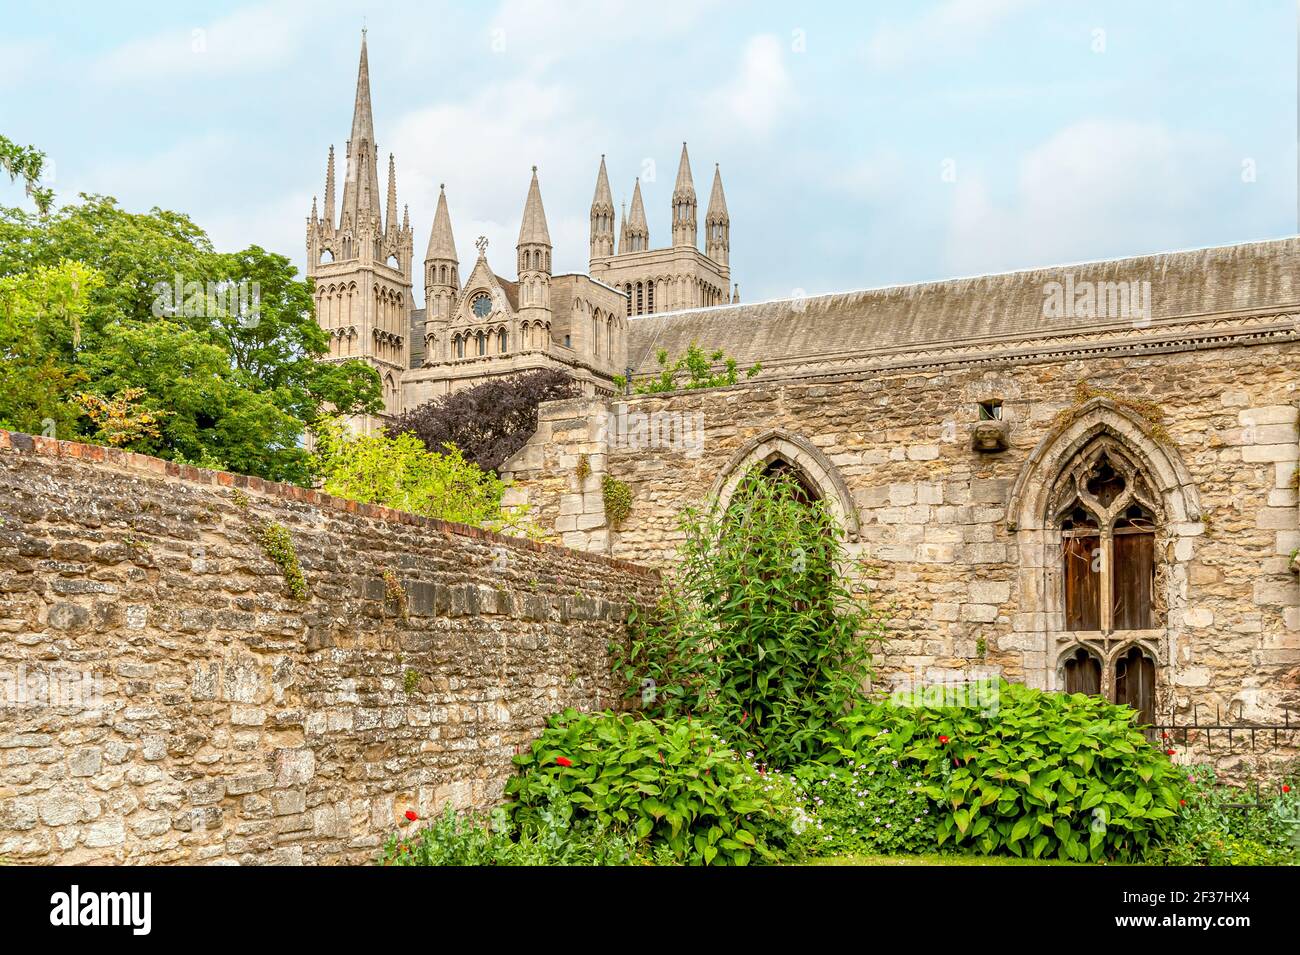 Peterborough Cathedral oder die Cathedral Church of St Peter, Northamptonshire, England, Großbritannien Stockfoto